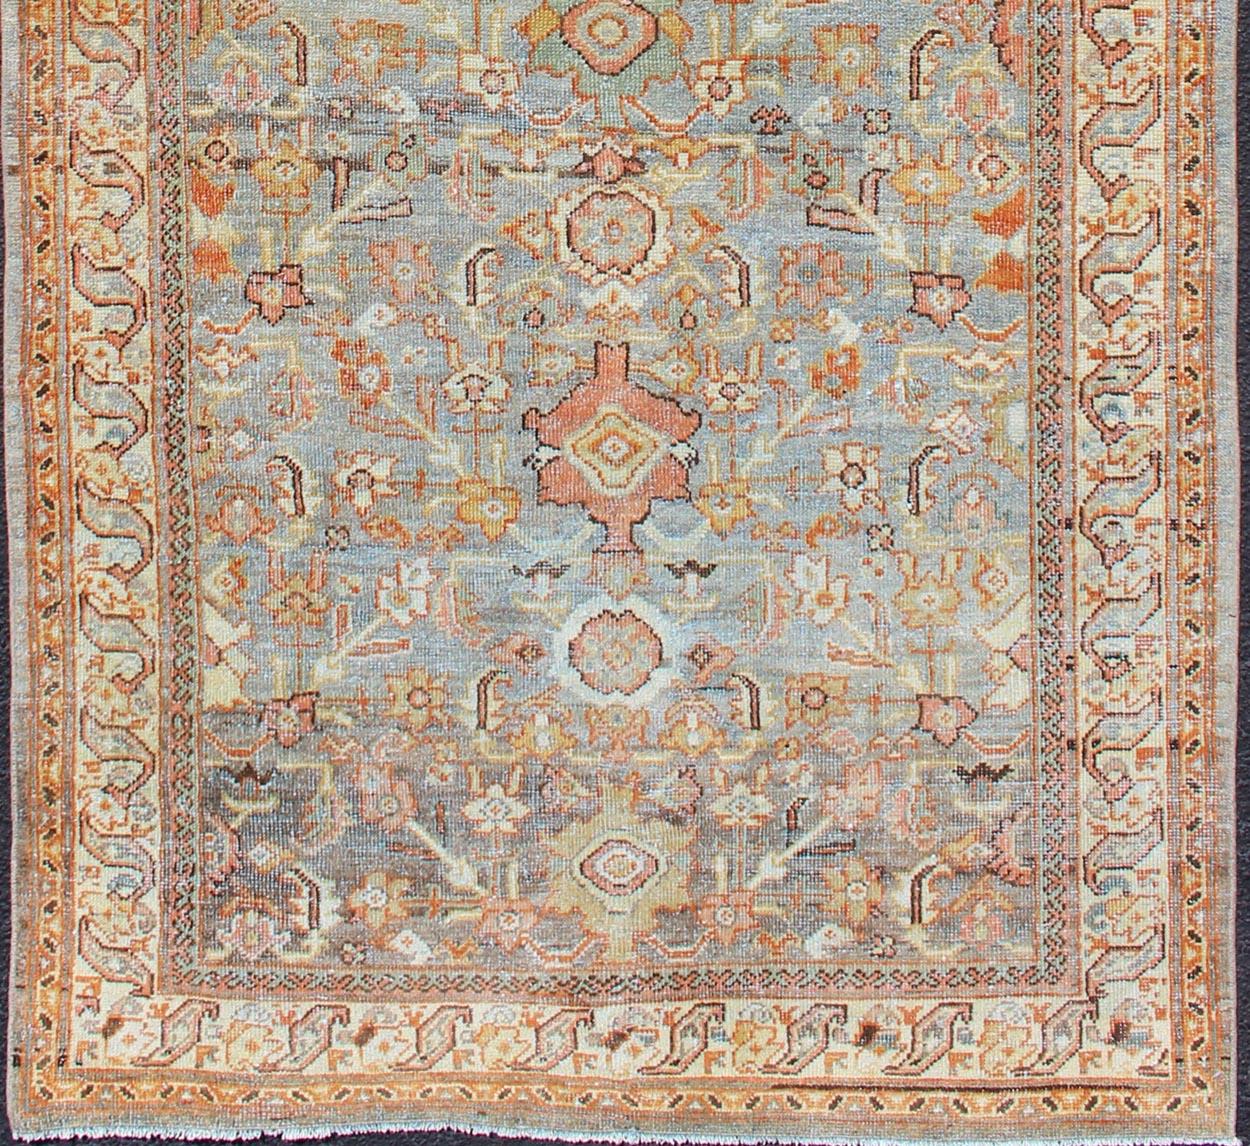 Persian Sultanabad antique rug with floral design in gray, green, blue, and red colors with all-over pattern, rug SUS-2002-642, country of origin / type: Iran / Sultanabad circa 1900.

This antique Persian Sultanabad rug, circa early 20th century,